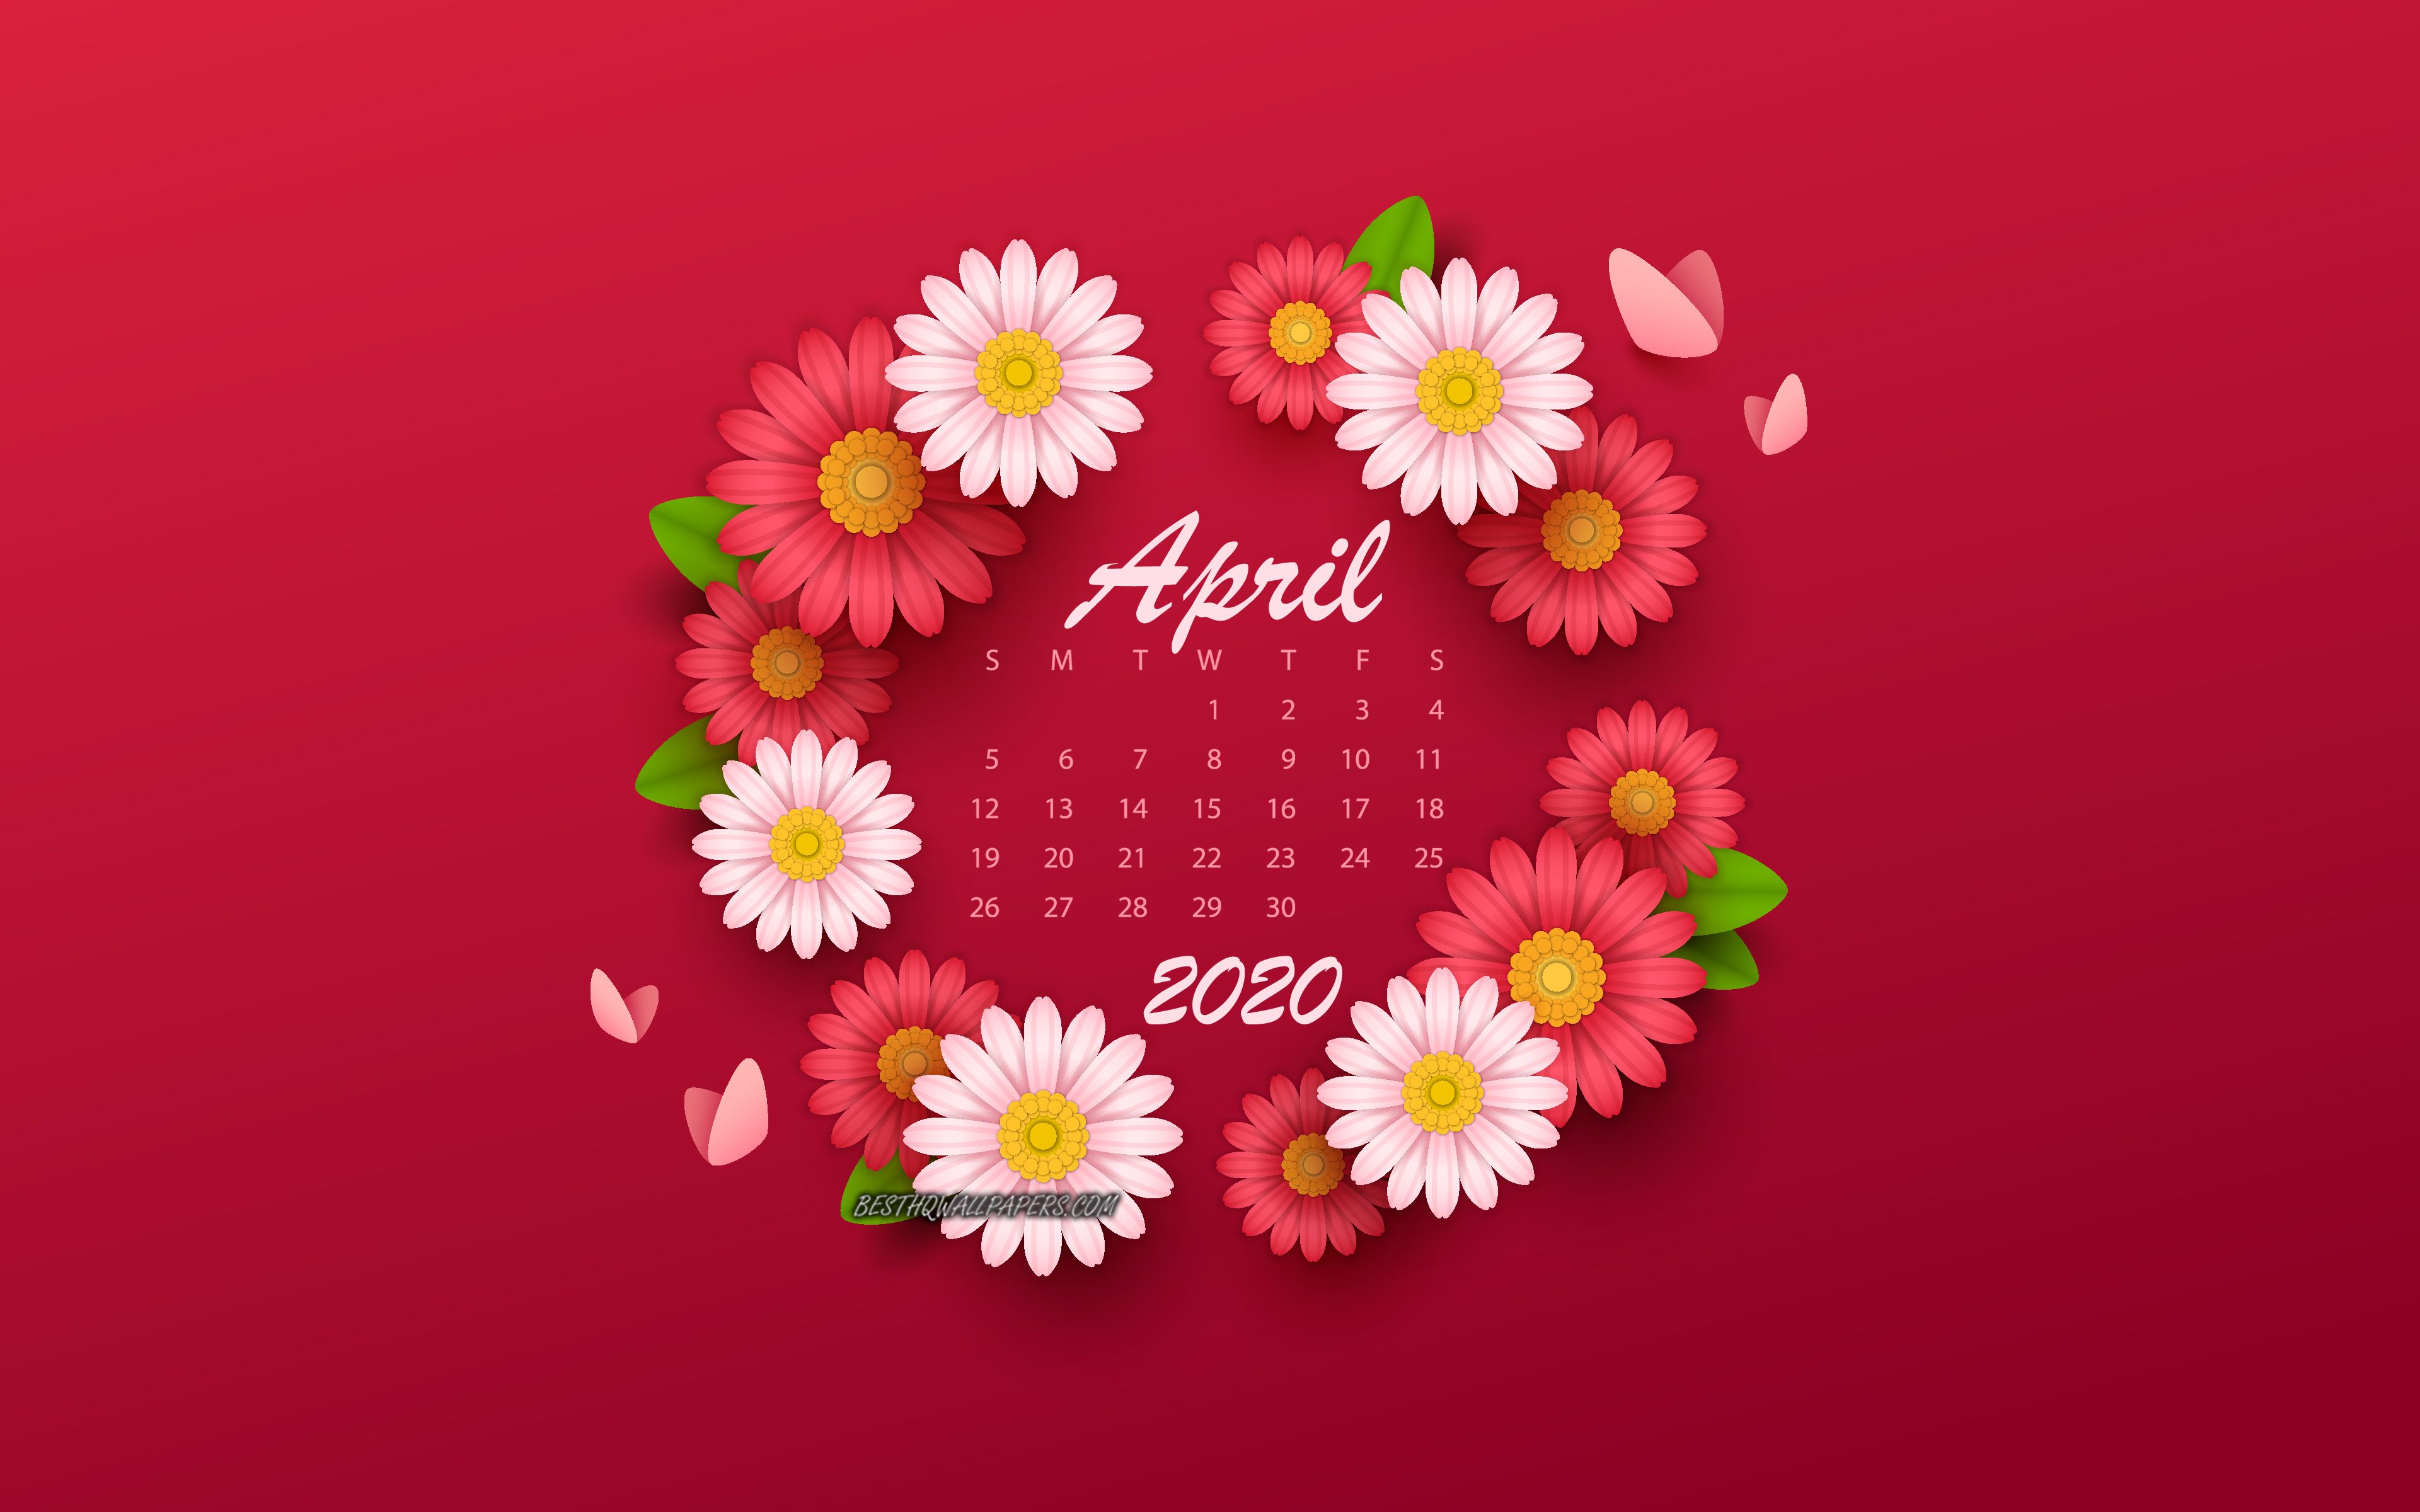 Download wallpaper 2020 April Calendar, background with flowers